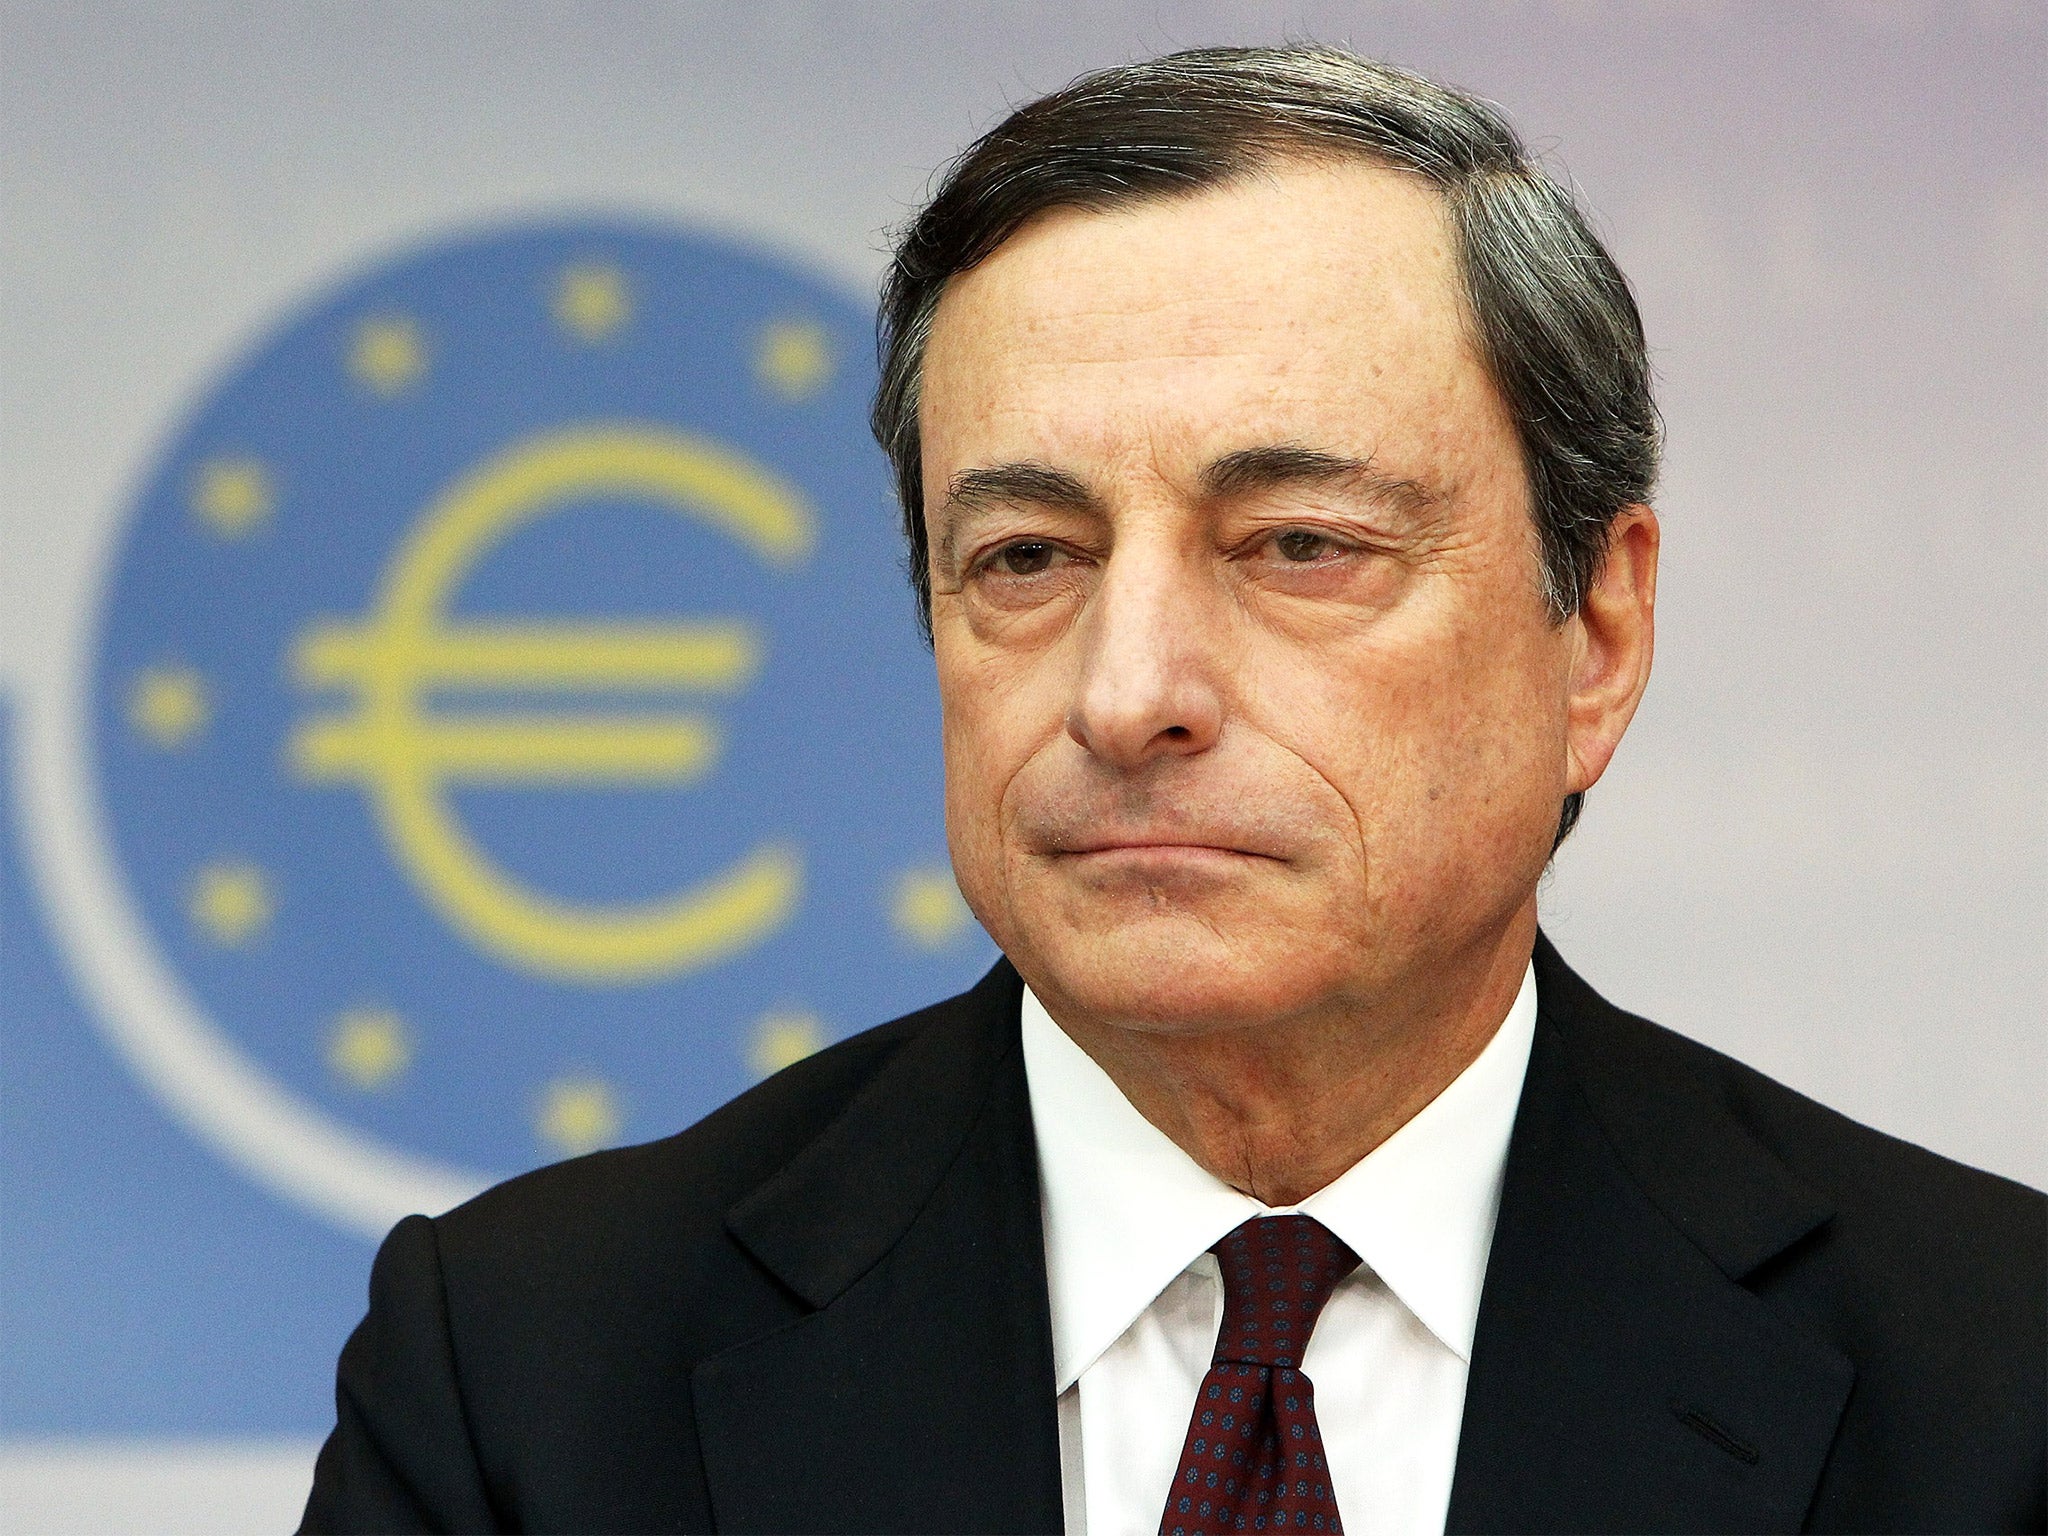 “Our monetary policy is certainly supporting the recovery," Draghi told an audience in Frankfurt